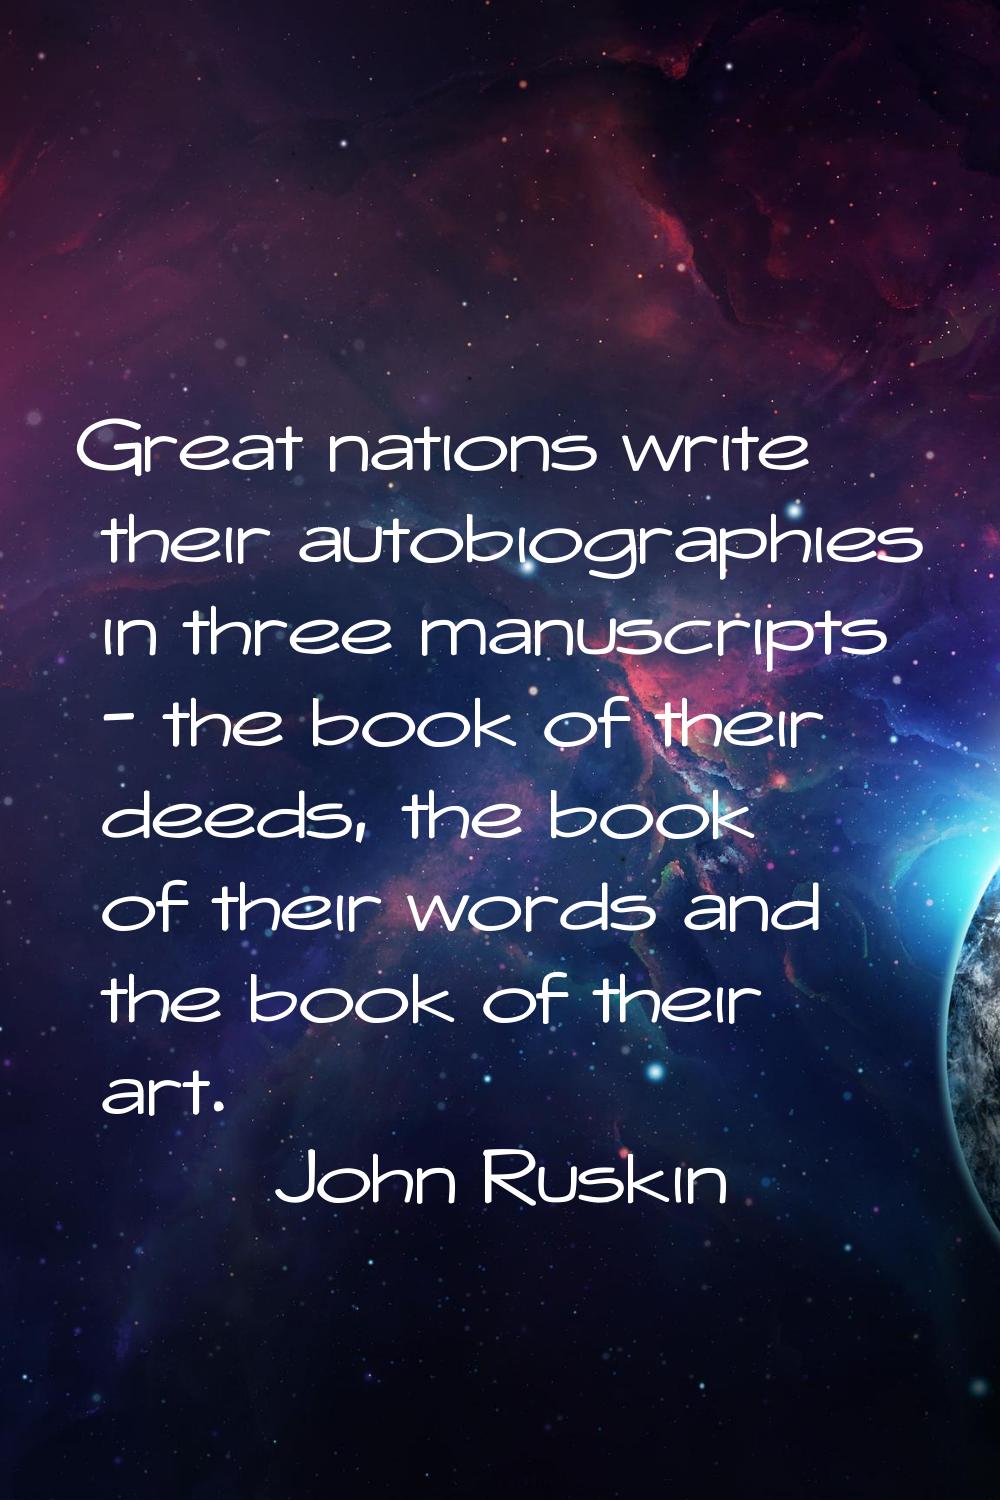 Great nations write their autobiographies in three manuscripts - the book of their deeds, the book 